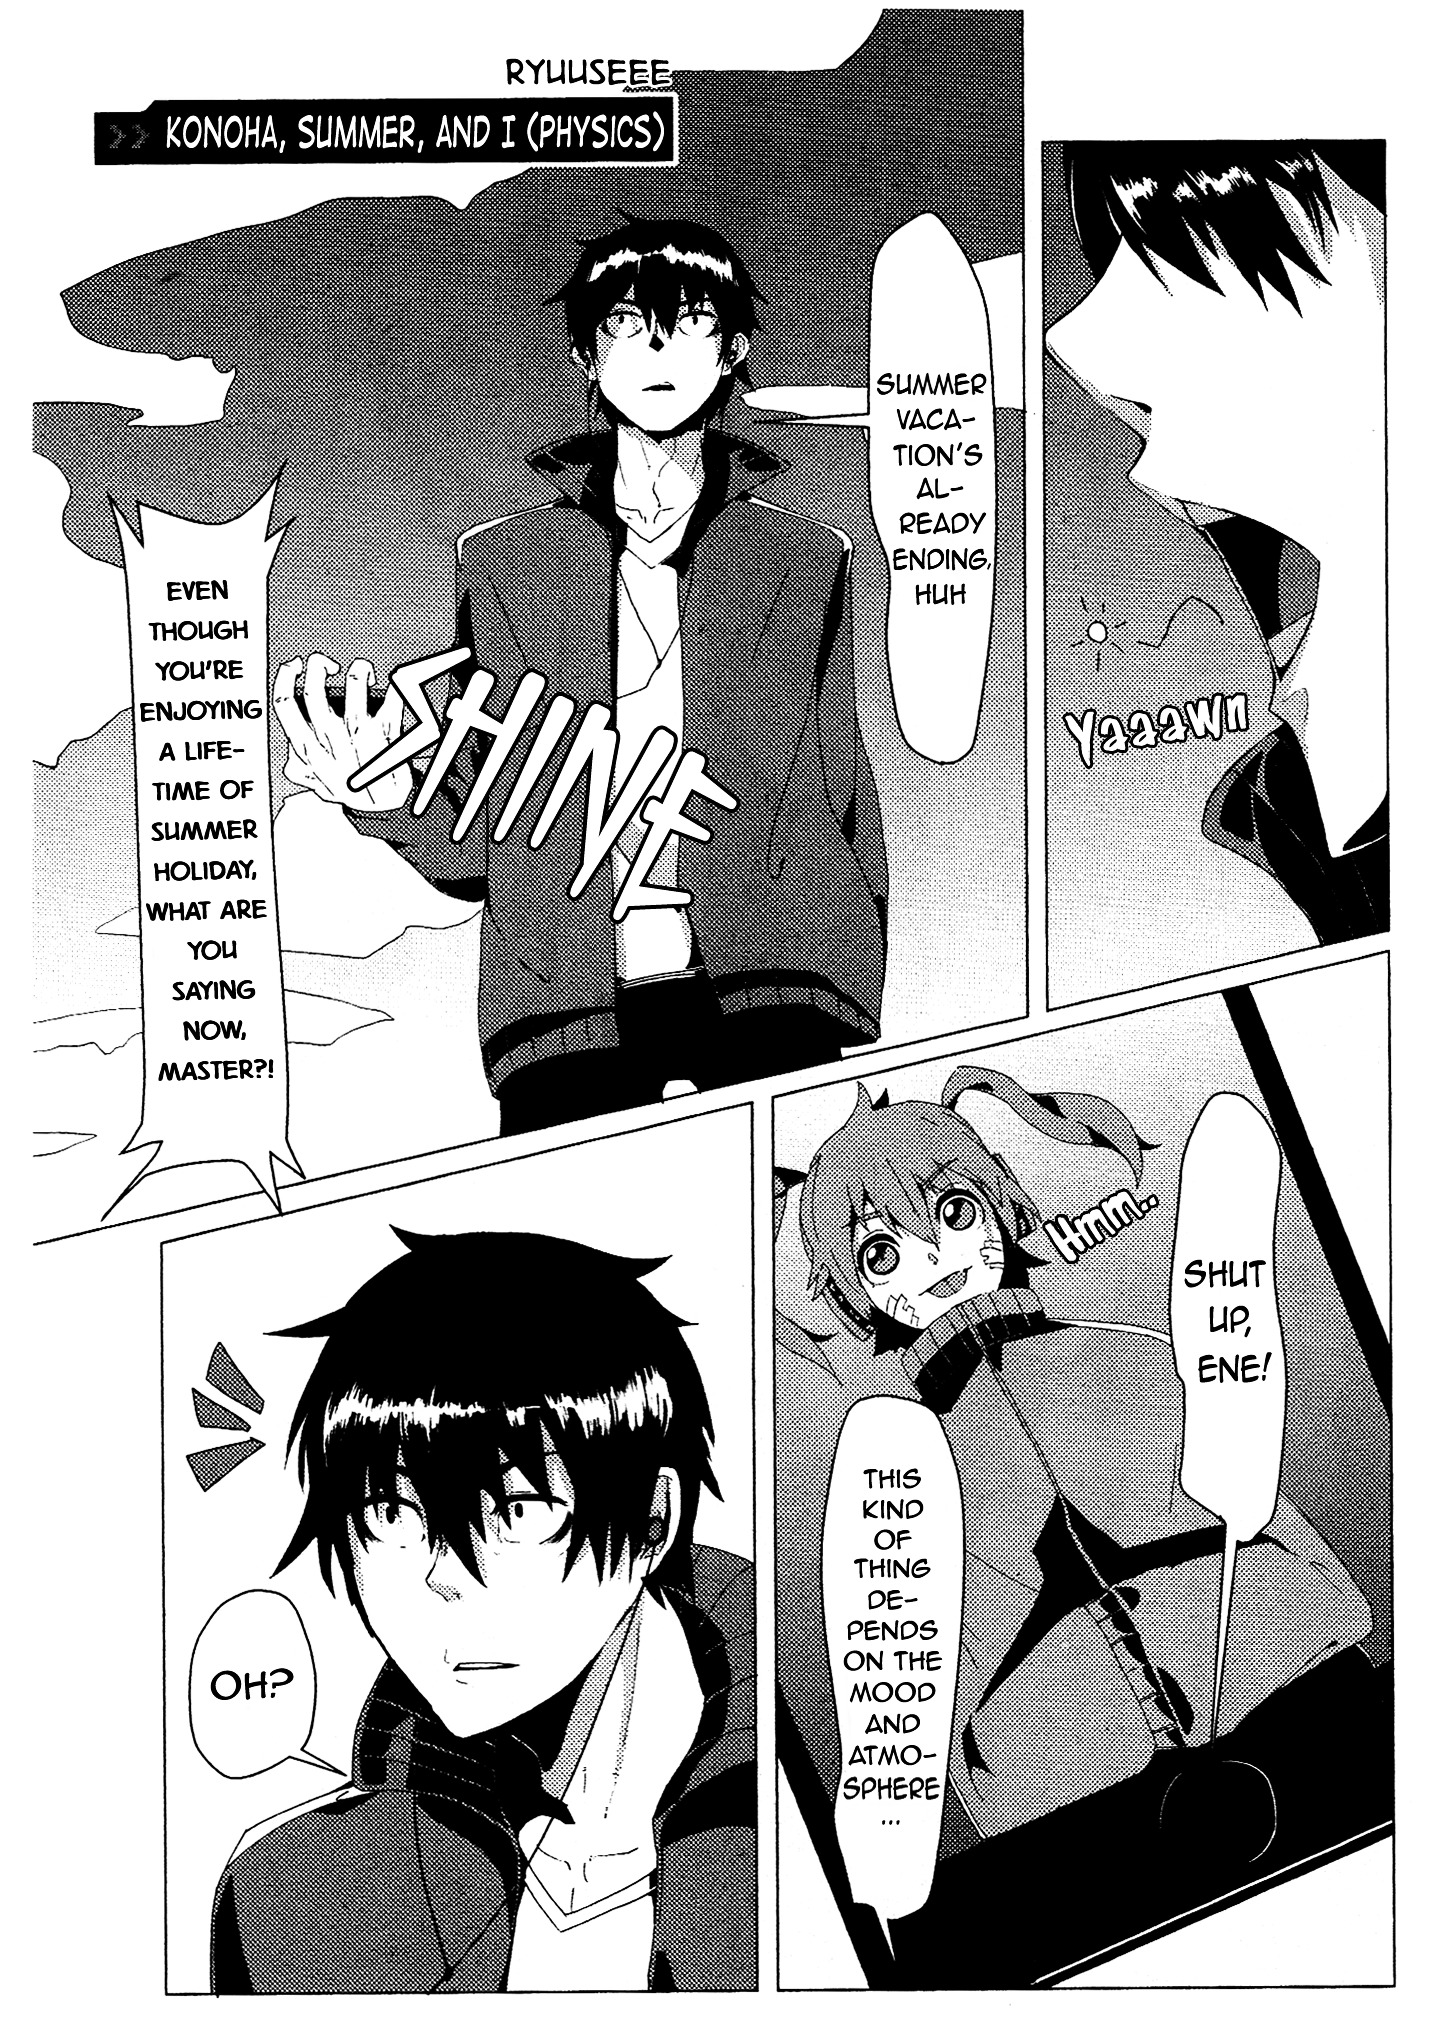 Kagerou Daze Official Anthology Comic -Summer- Vol.1 Chapter 12 : Konoha, Summer, And I (Physics) By Ryuuseee - Picture 1